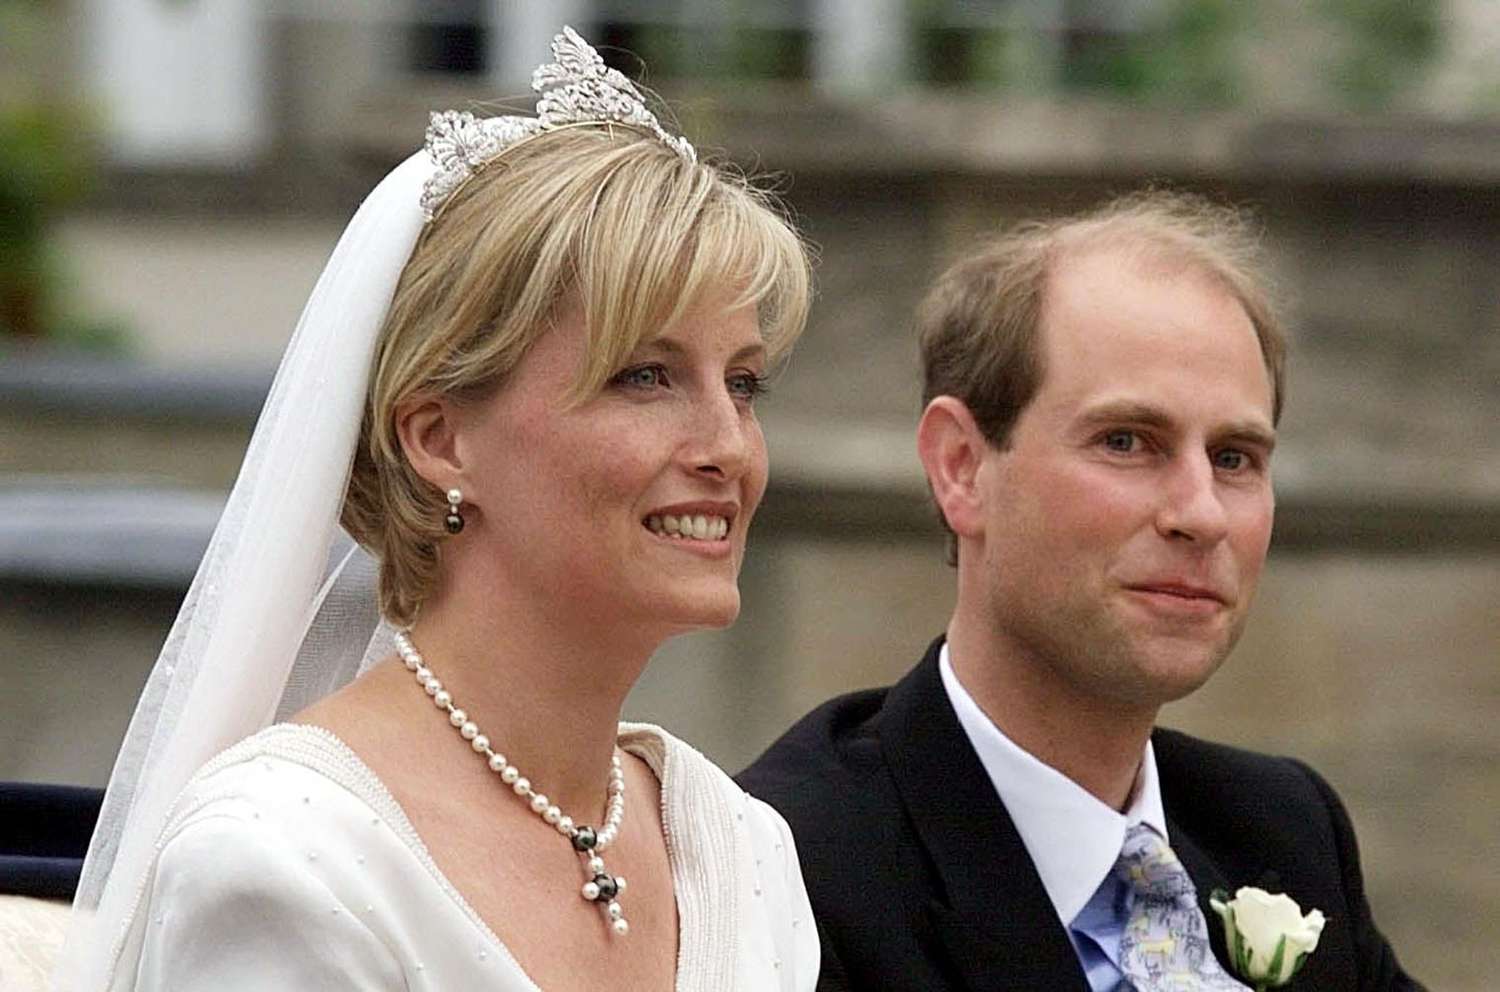 Sophie Wessex in diamond tiara, veil, pearl earrings, and pearl necklace sitting next to Prince Edward